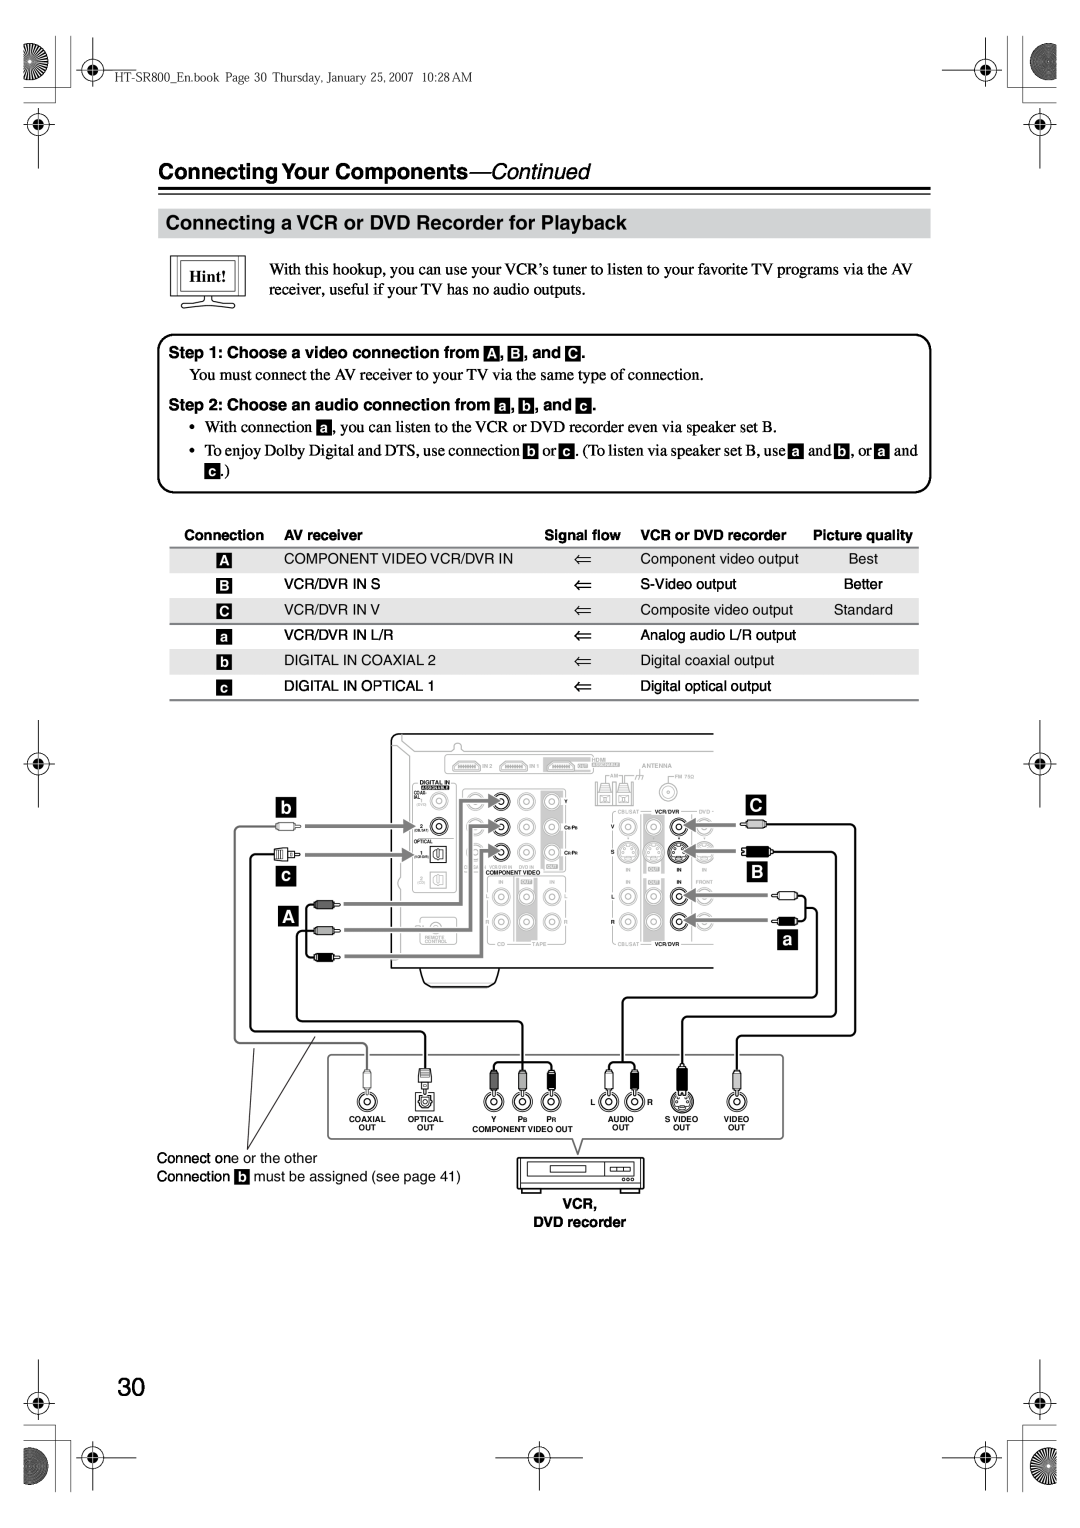 Onkyo HT-SR800 instruction manual Connecting a VCR or DVD Recorder for Playback, Connecting Your Components-Continued, Hint 